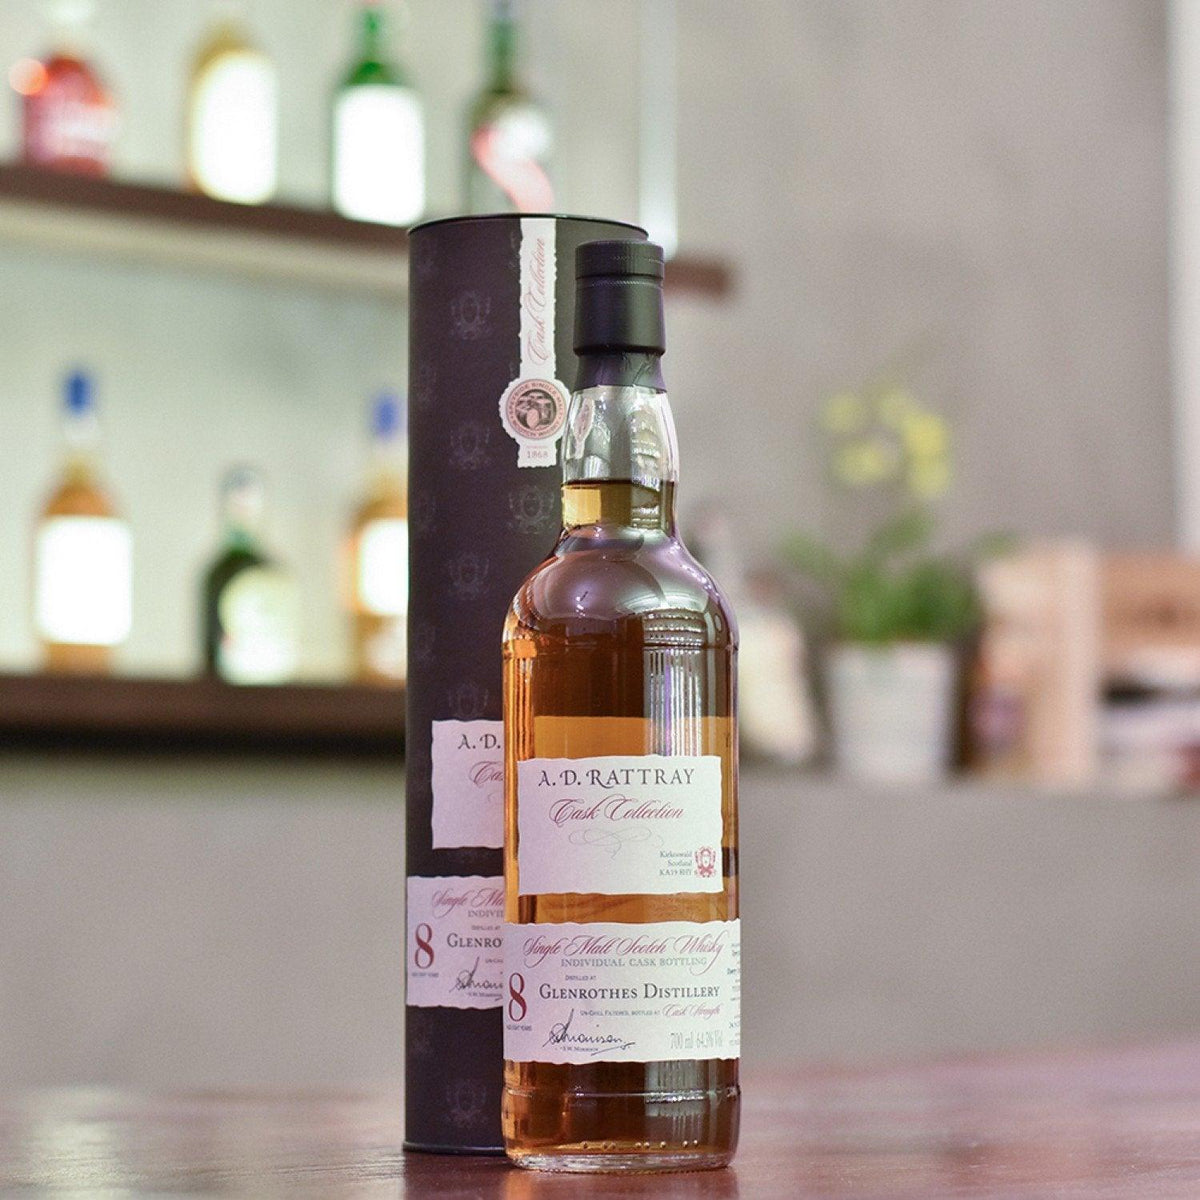 A.D. Rattray - Glenrothes 8 Year Old 2007 Cask 70010242 - The Rare Malt